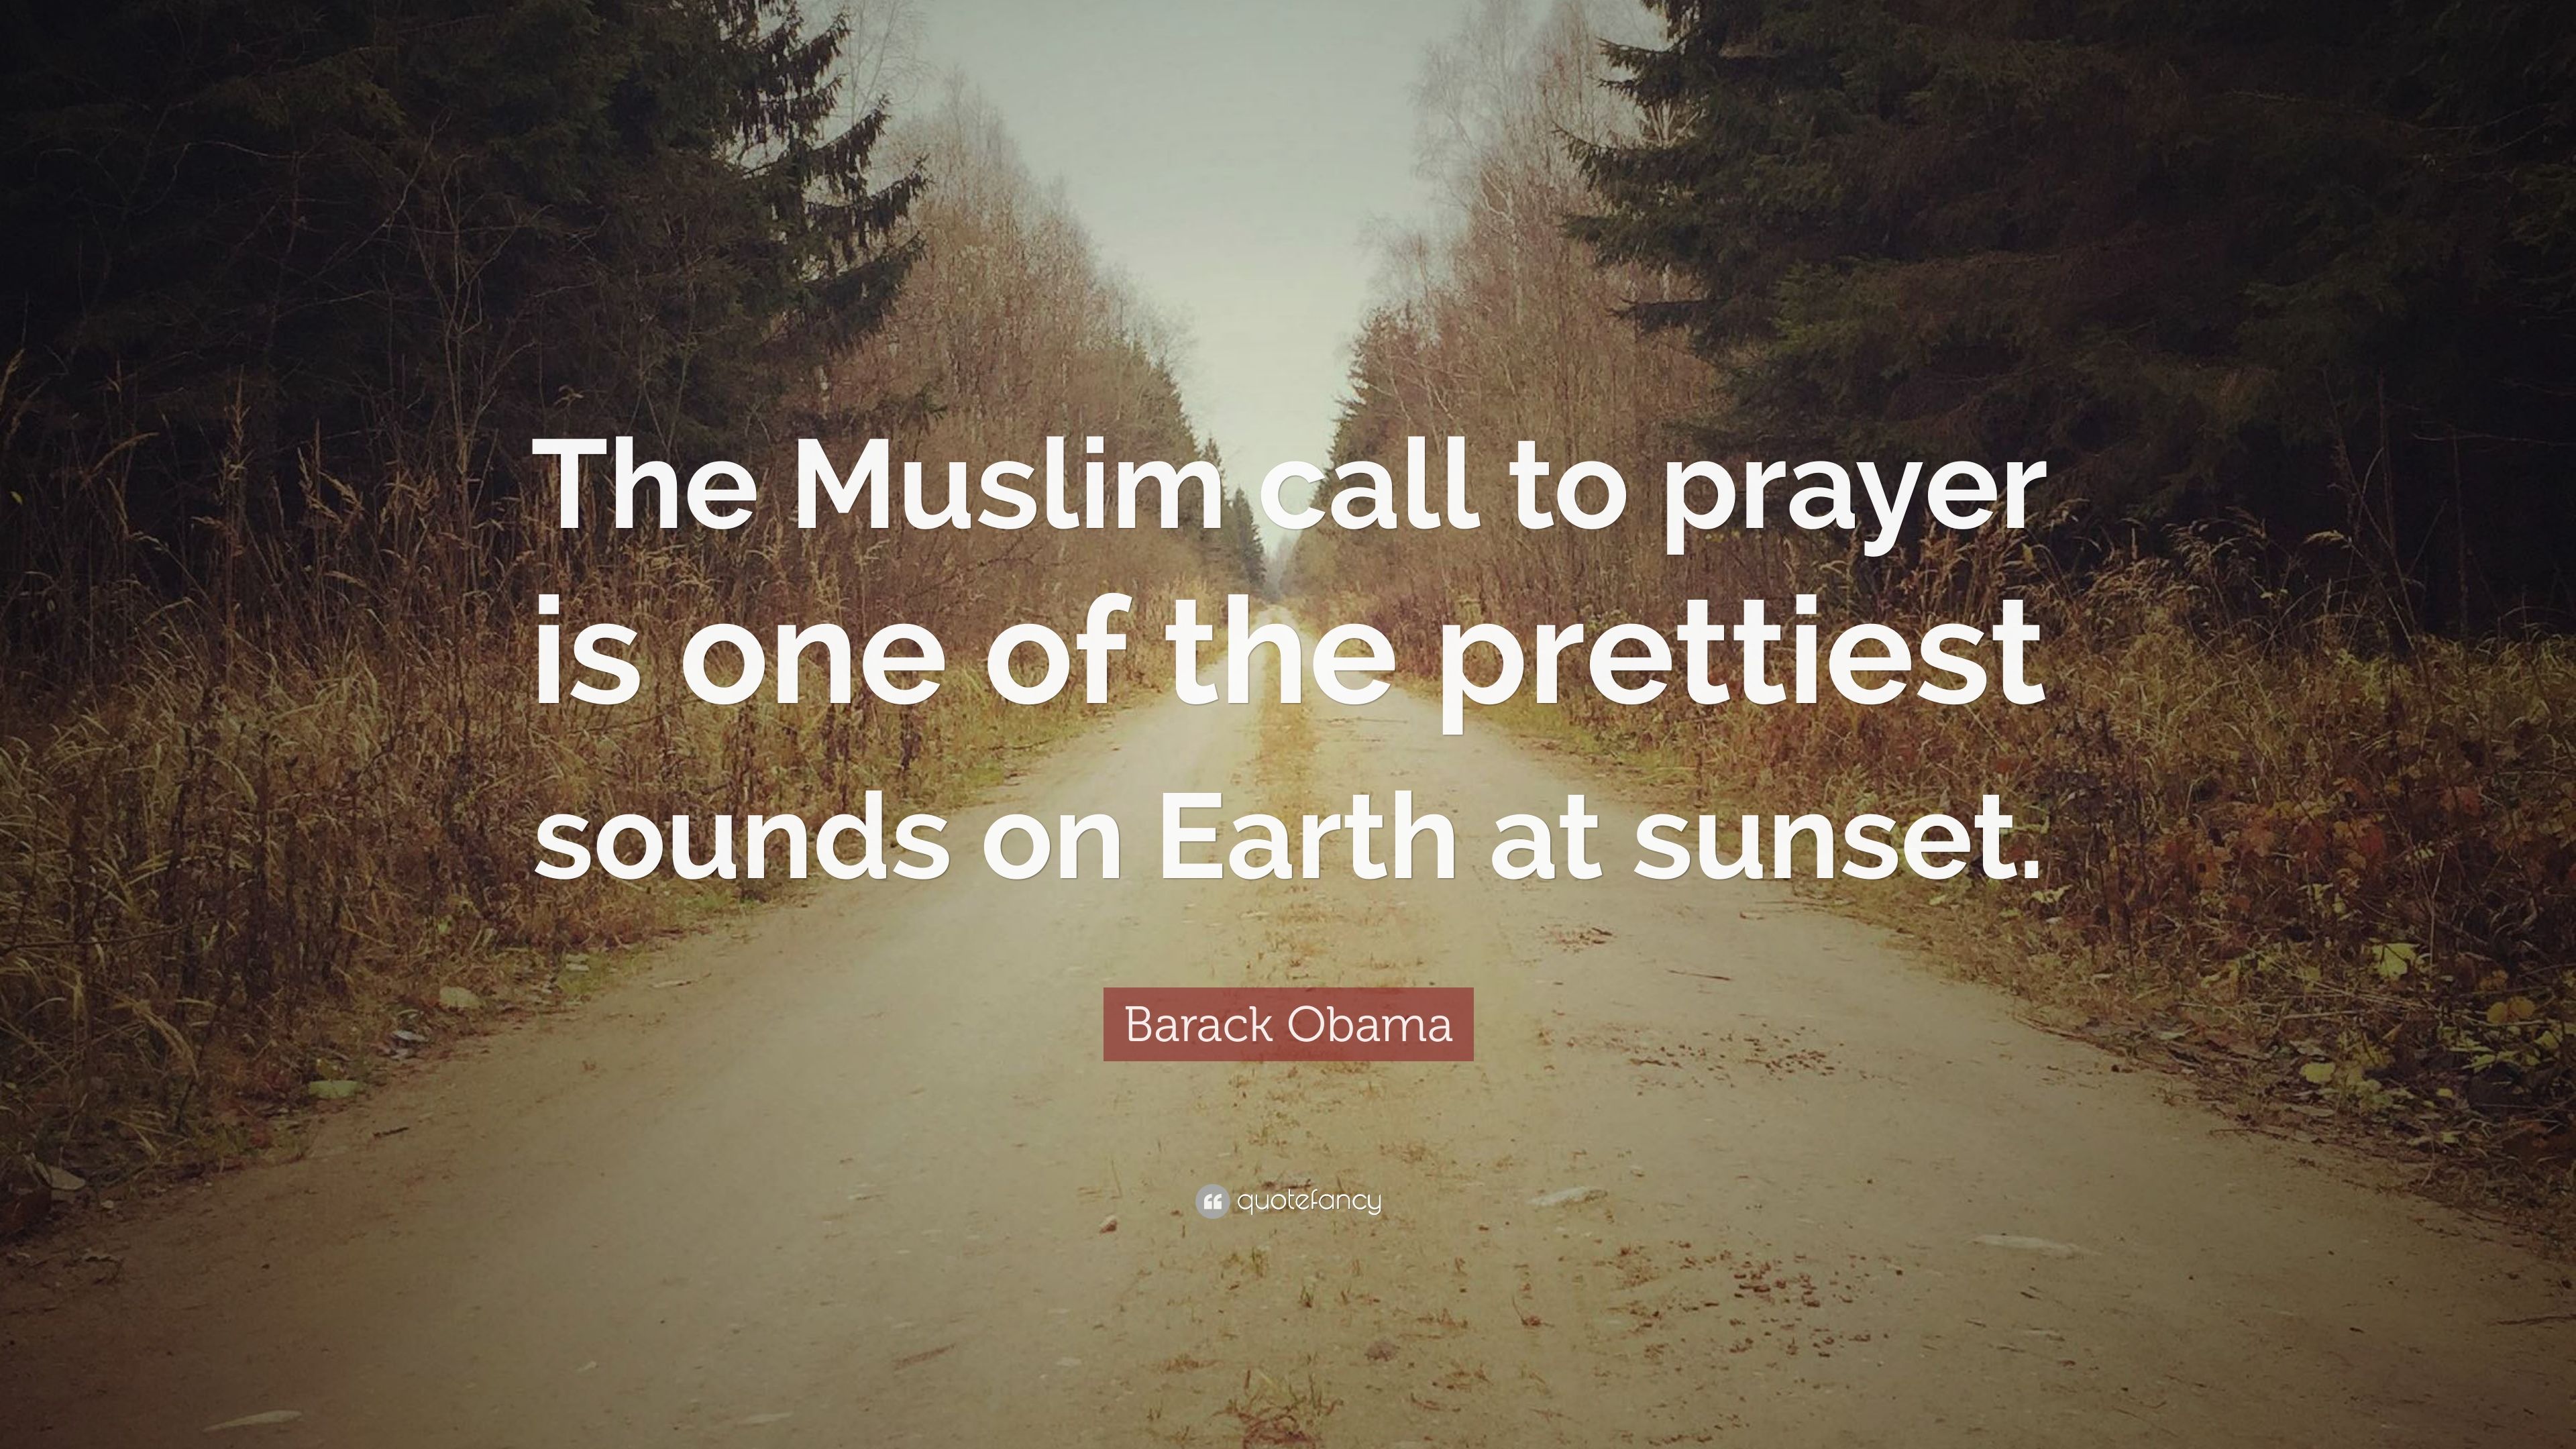 Barack Obama Quote: “The Muslim call to prayer is one